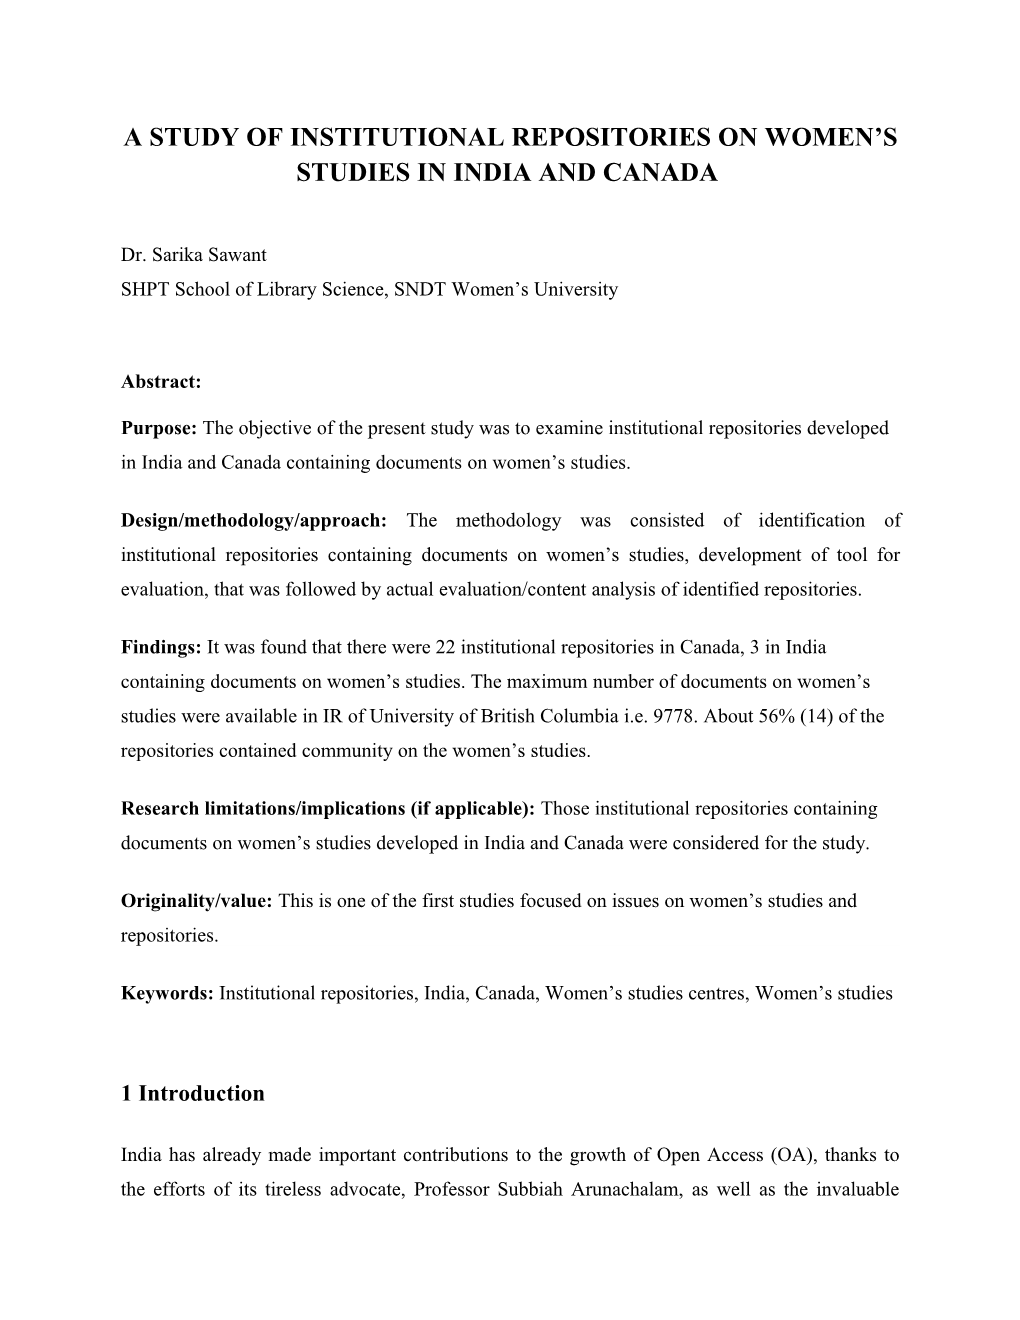 A Study of Institutional Repositories on Women S Studies in India and Canada